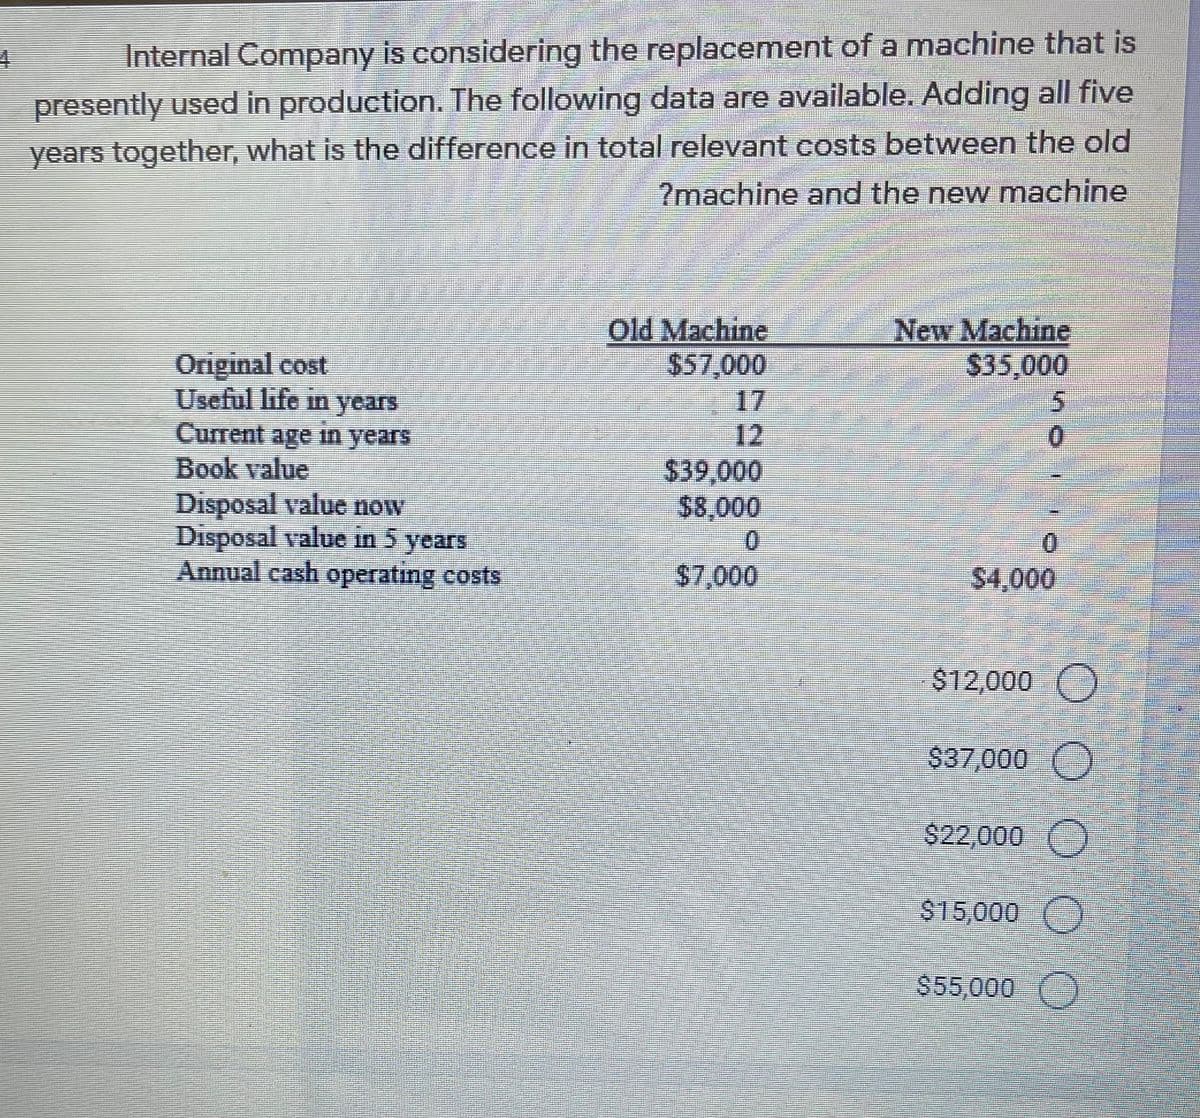 Internal Company is considering the replacement of a machine that is
presently used in production. The following data are available. Adding all five
years together, what is the difference in total relevant costs between the old
7machine and the new machine
Old Machine
$57,000
17
12
$39,000
$8,000
0.
New Machine
$35,000
Original cost
Useful life in years
Current age in years
Book value
Disposal value now
Disposal value in 5 years
Annual cash operating costs
0.
$7,000
$4,000
$12,000 O
$37,000 O
$22,000
S15,000
$55,000
